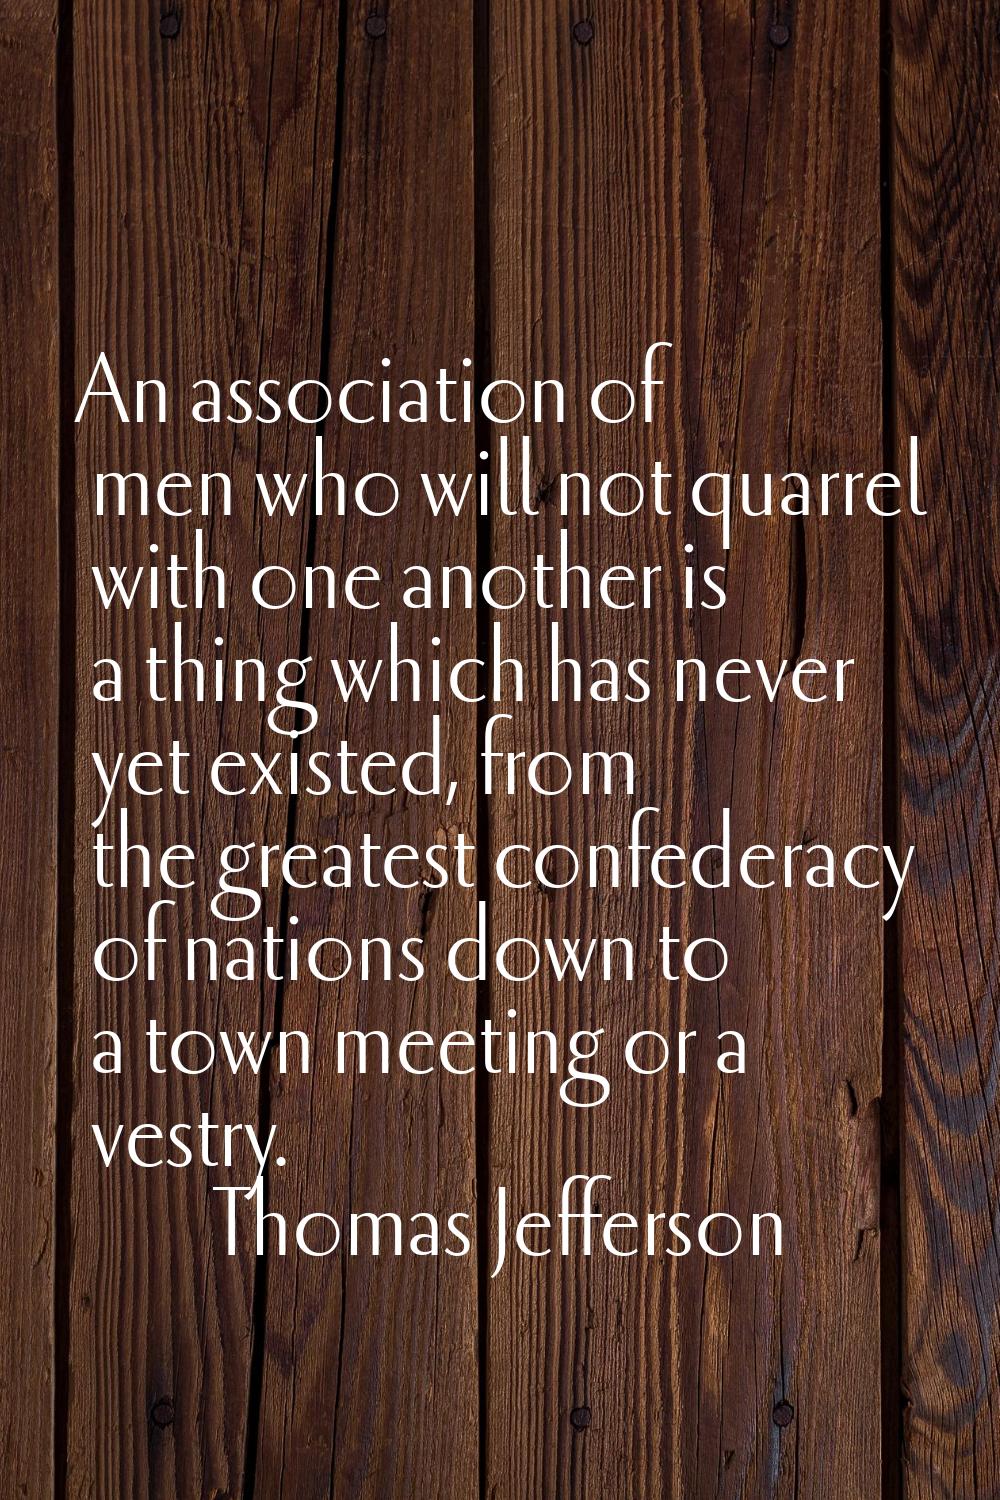 An association of men who will not quarrel with one another is a thing which has never yet existed,